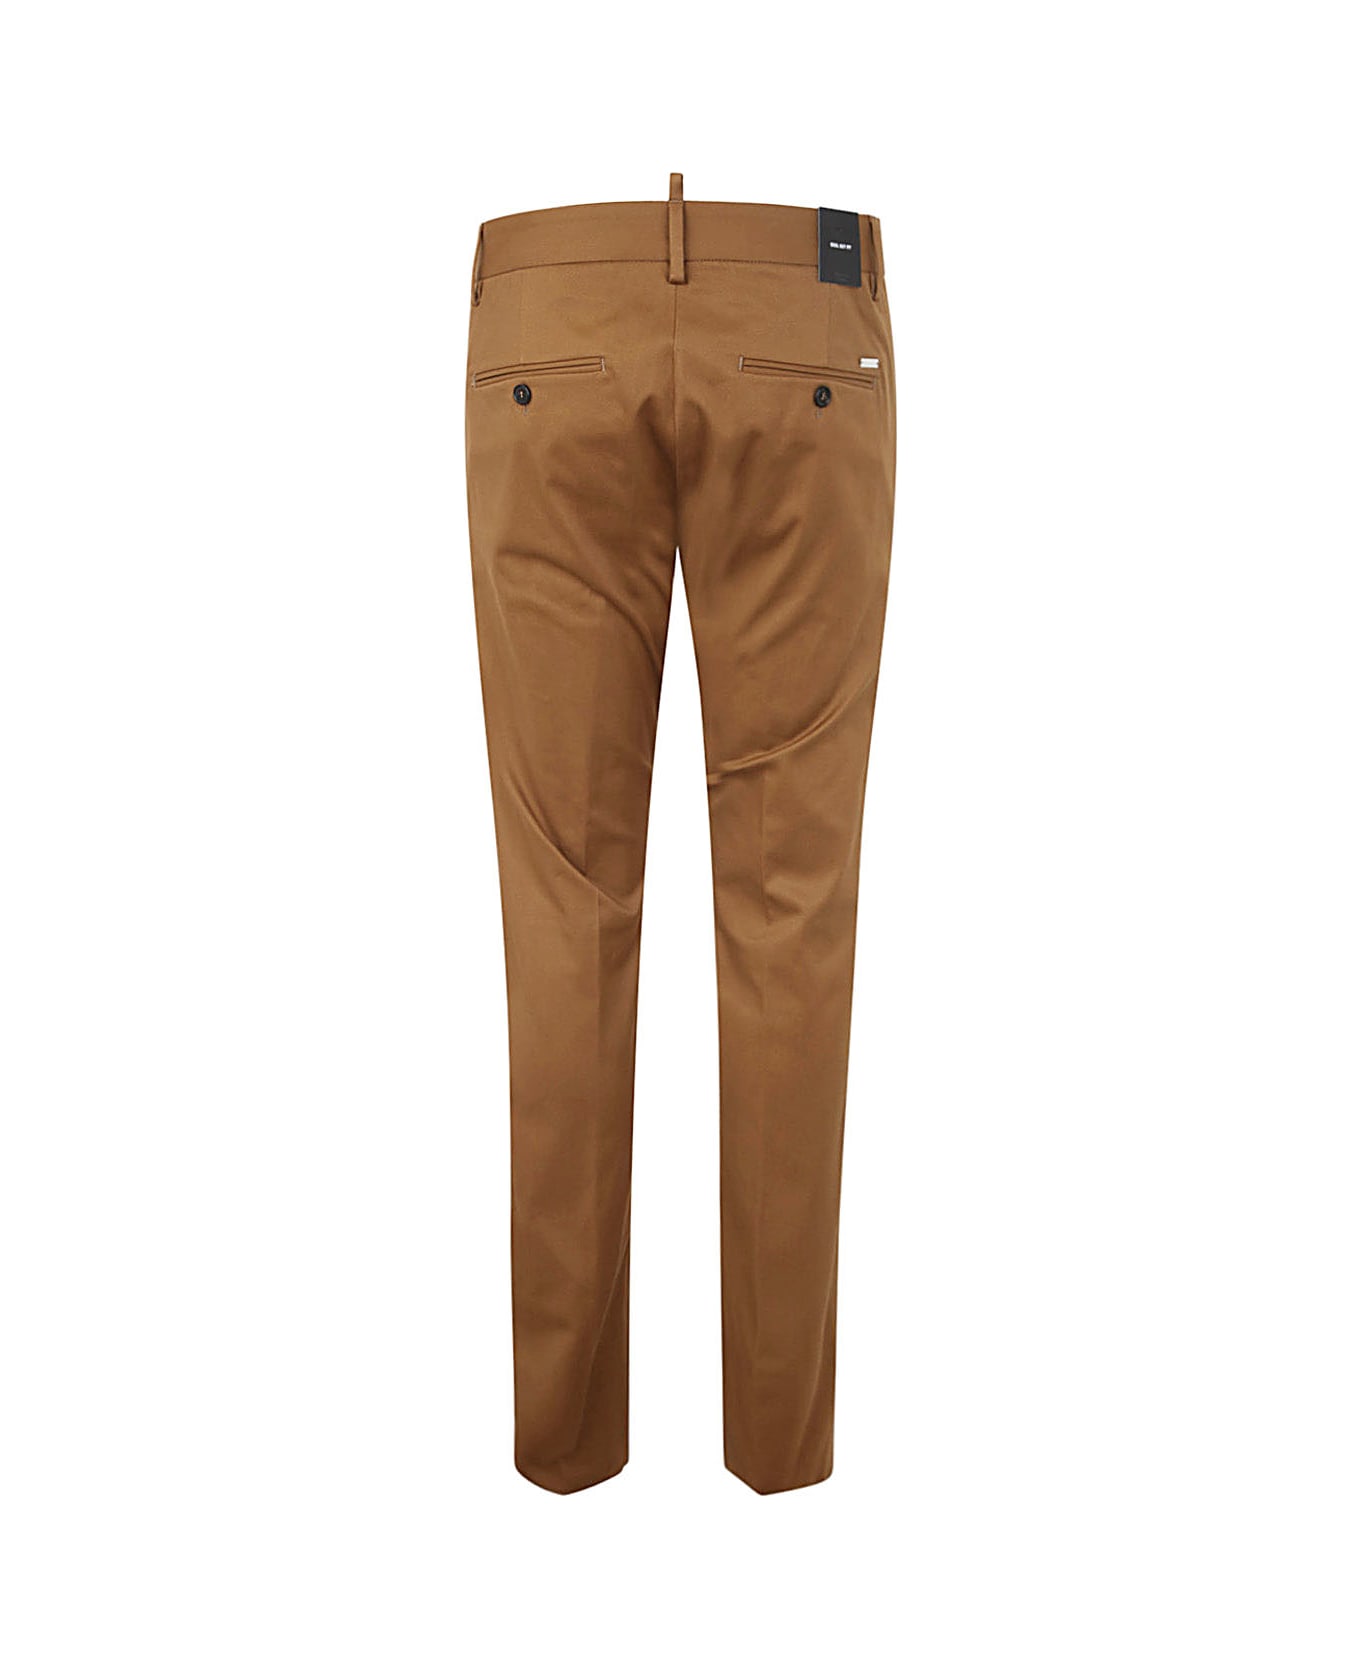 Dsquared2 Cool Guy Pant - Camel